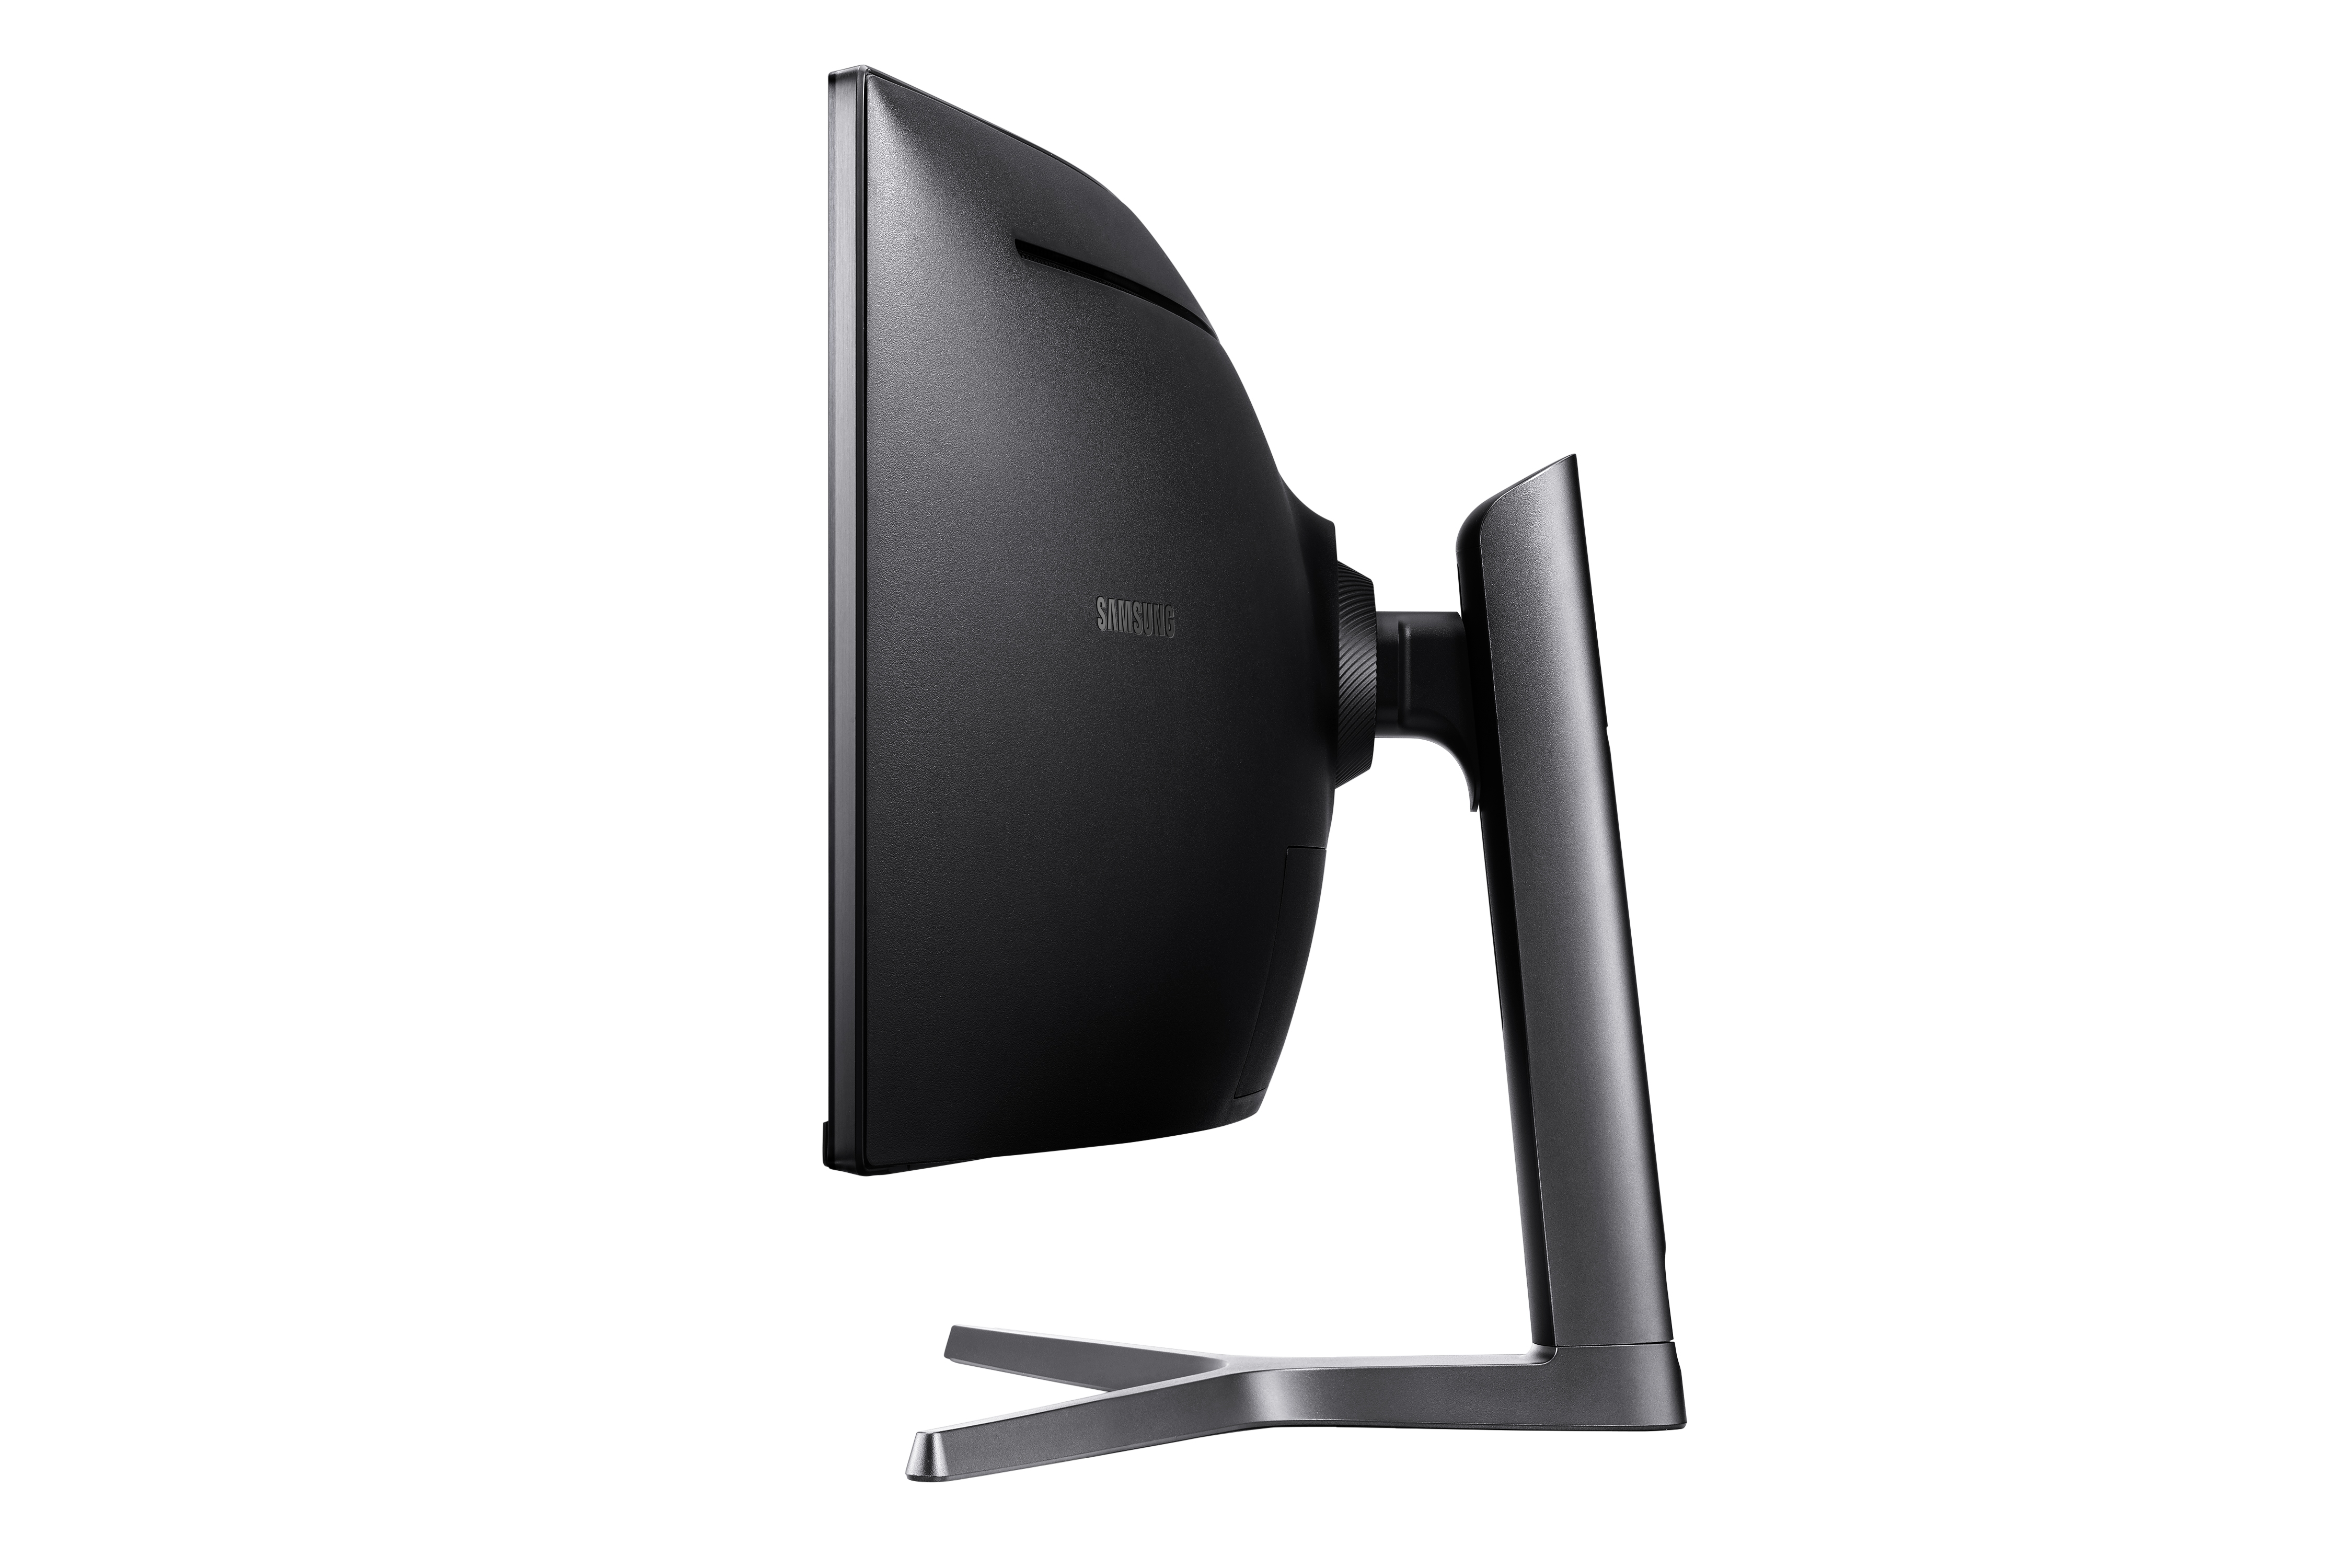 SAMSUNG 49” Odyssey CRG Series Dual QHD (5120x1440) Curved Gaming Monitor,  120Hz, QLED, HDR, Height Adjustable Stand, Radeon FreeSync, LC49RG90SSNXZA